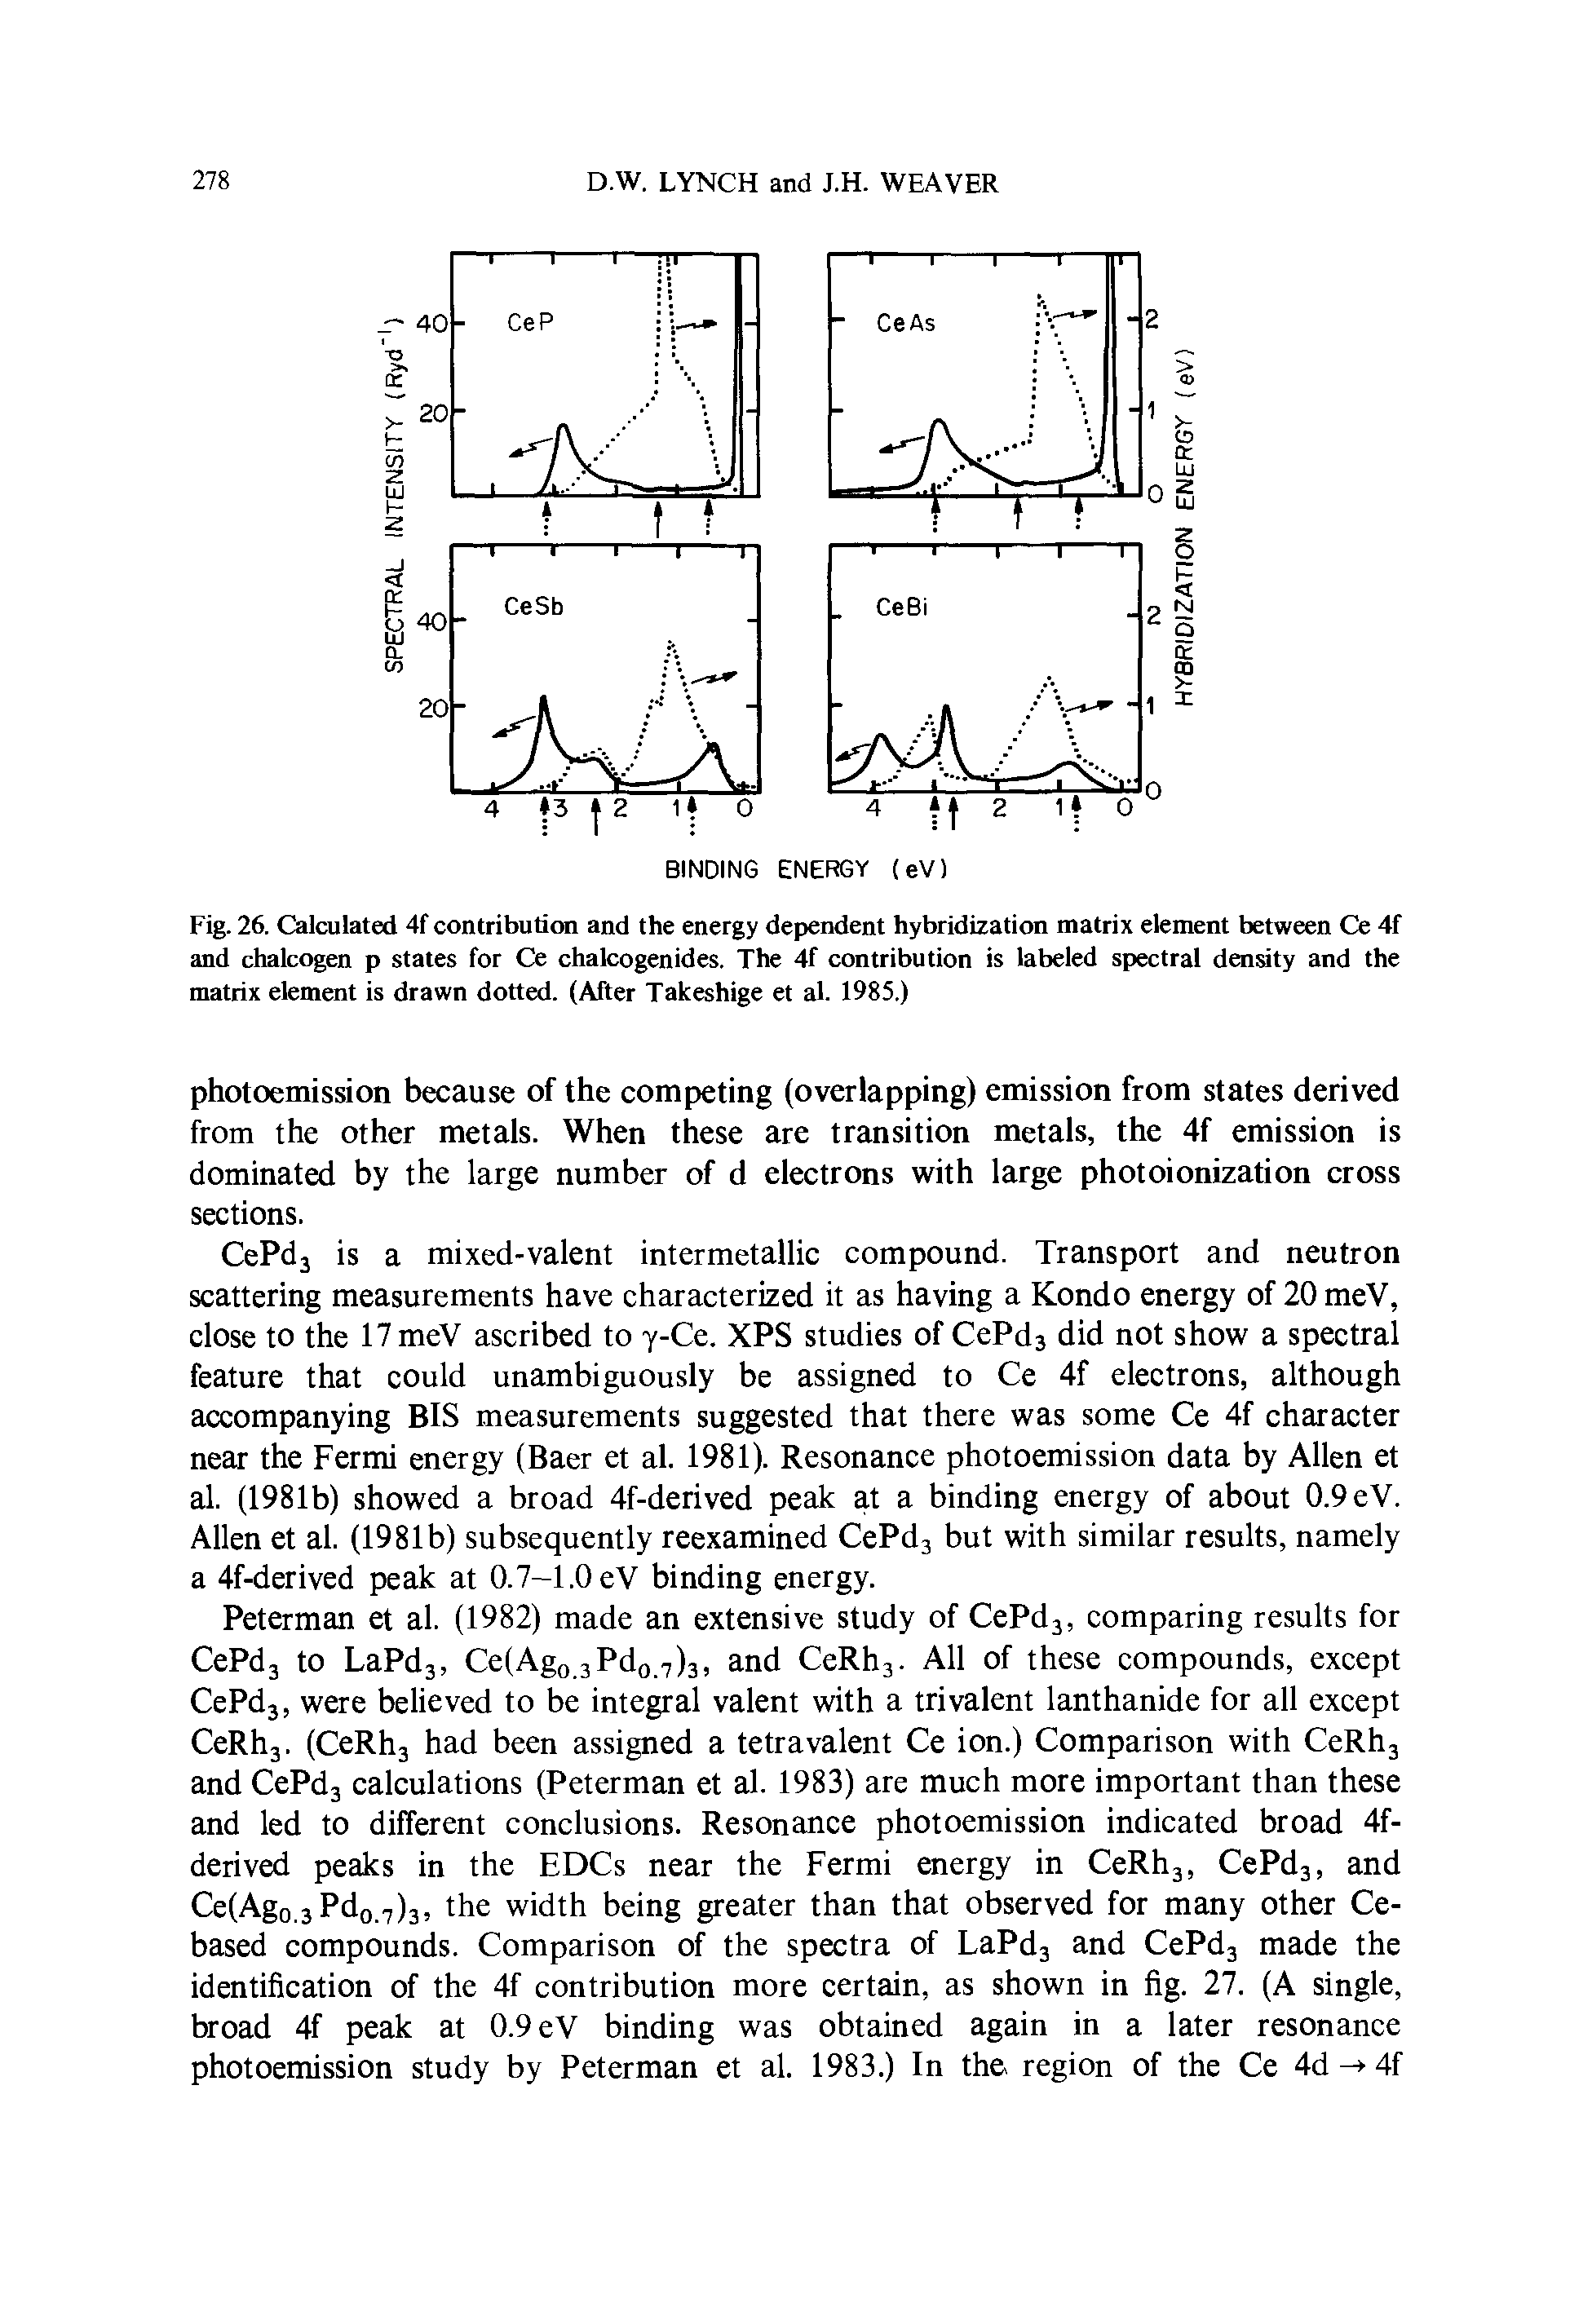 Fig. 26. Calculated 4f contribution and the energy dependent hybridization matrix element between Ce 4f and chalcogen p states for Ce chalcogenides. The 4f contribution is labeled spectral density and the matrix element is drawn dotted. (After Takeshige et al. 1985.)...